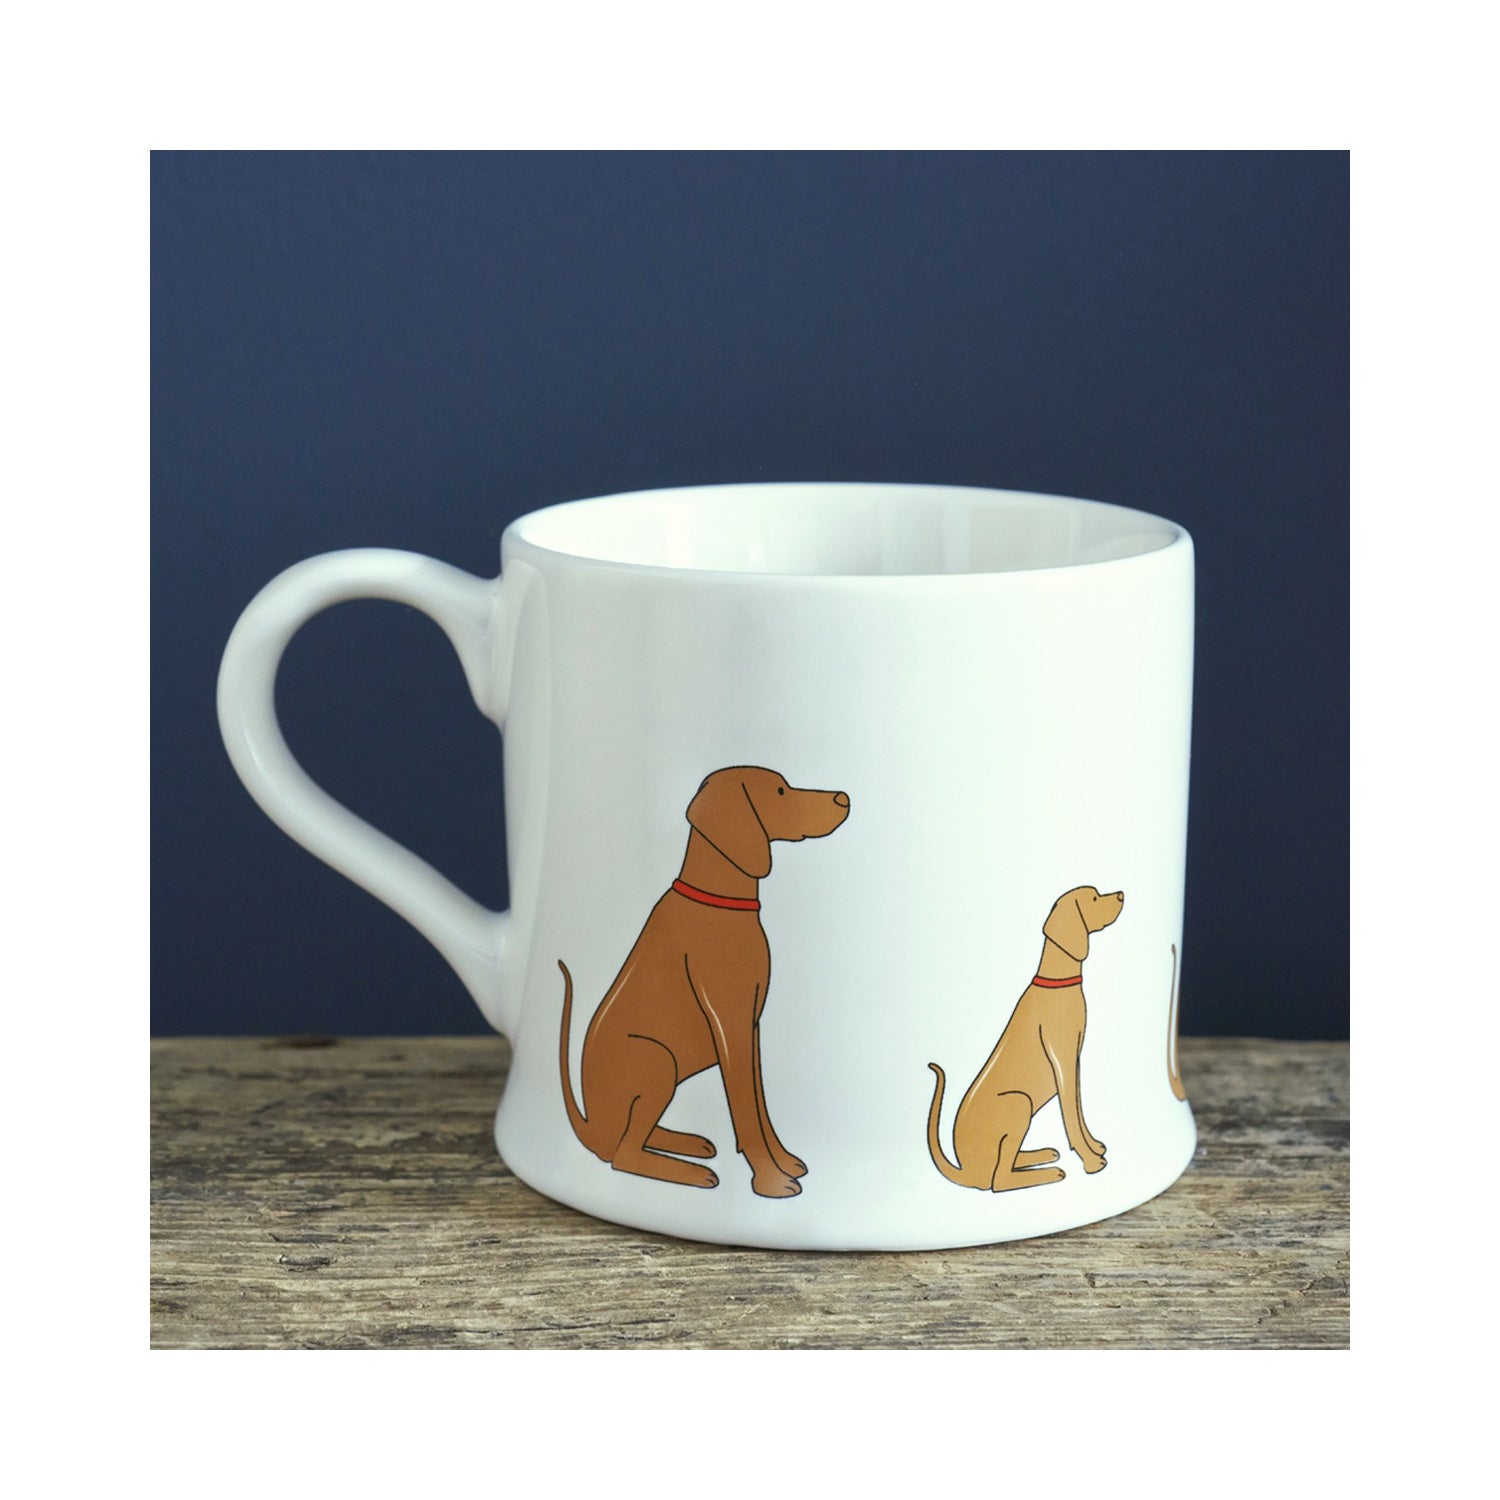 Dog Lover Gifts available at Dog Krazy Gifts - Joe The Vizsla Mug - part of the Sweet William range available from Dog Krazy Gifts